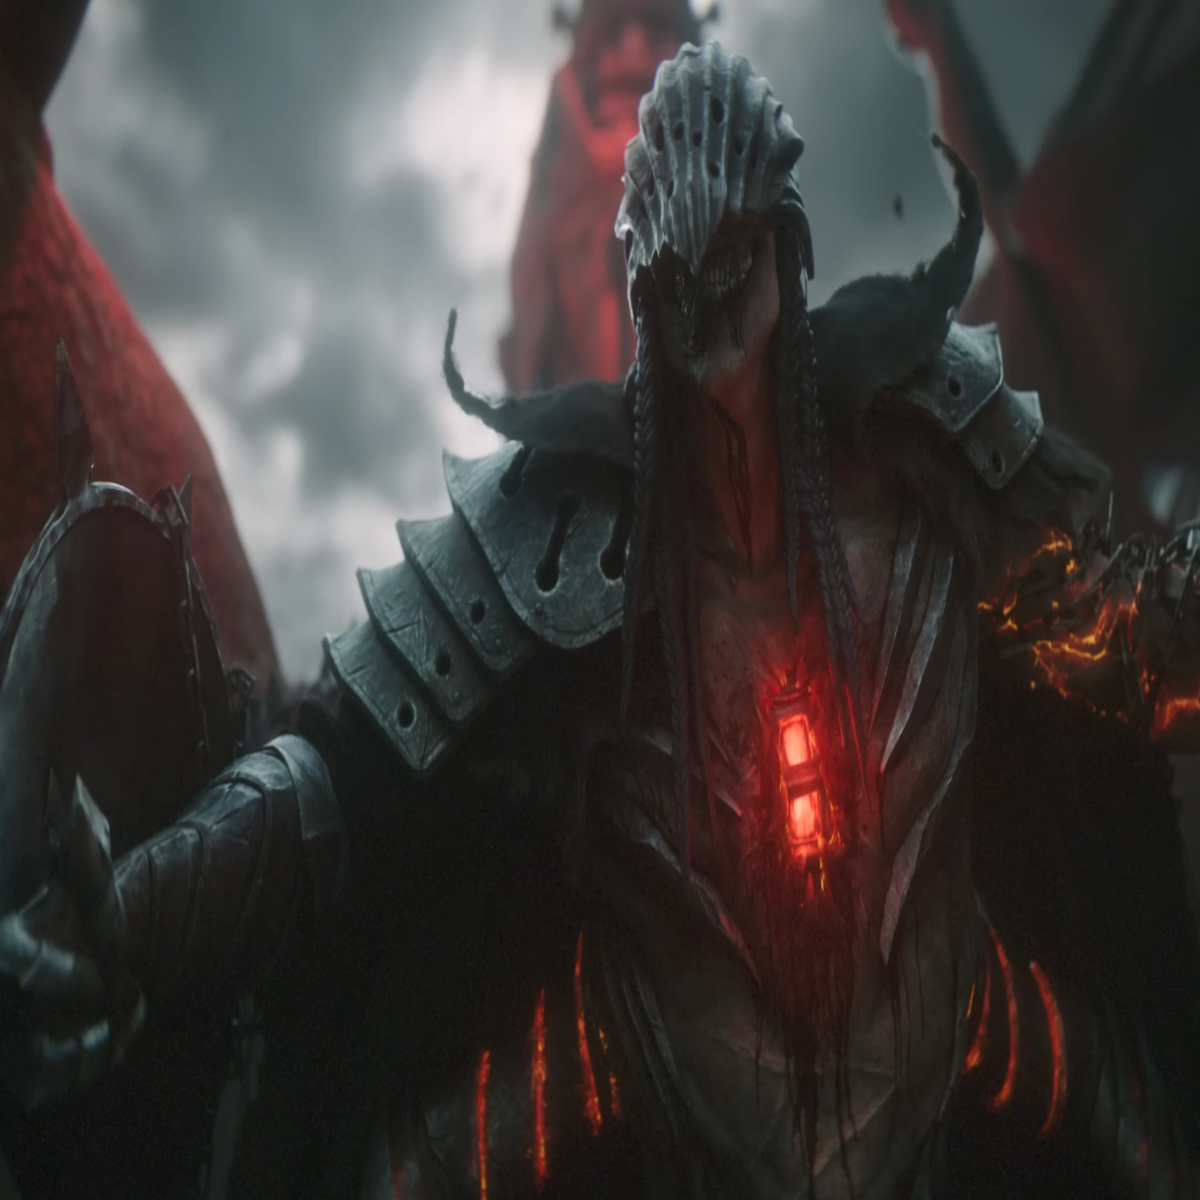 Lords of the Fallen Release Date